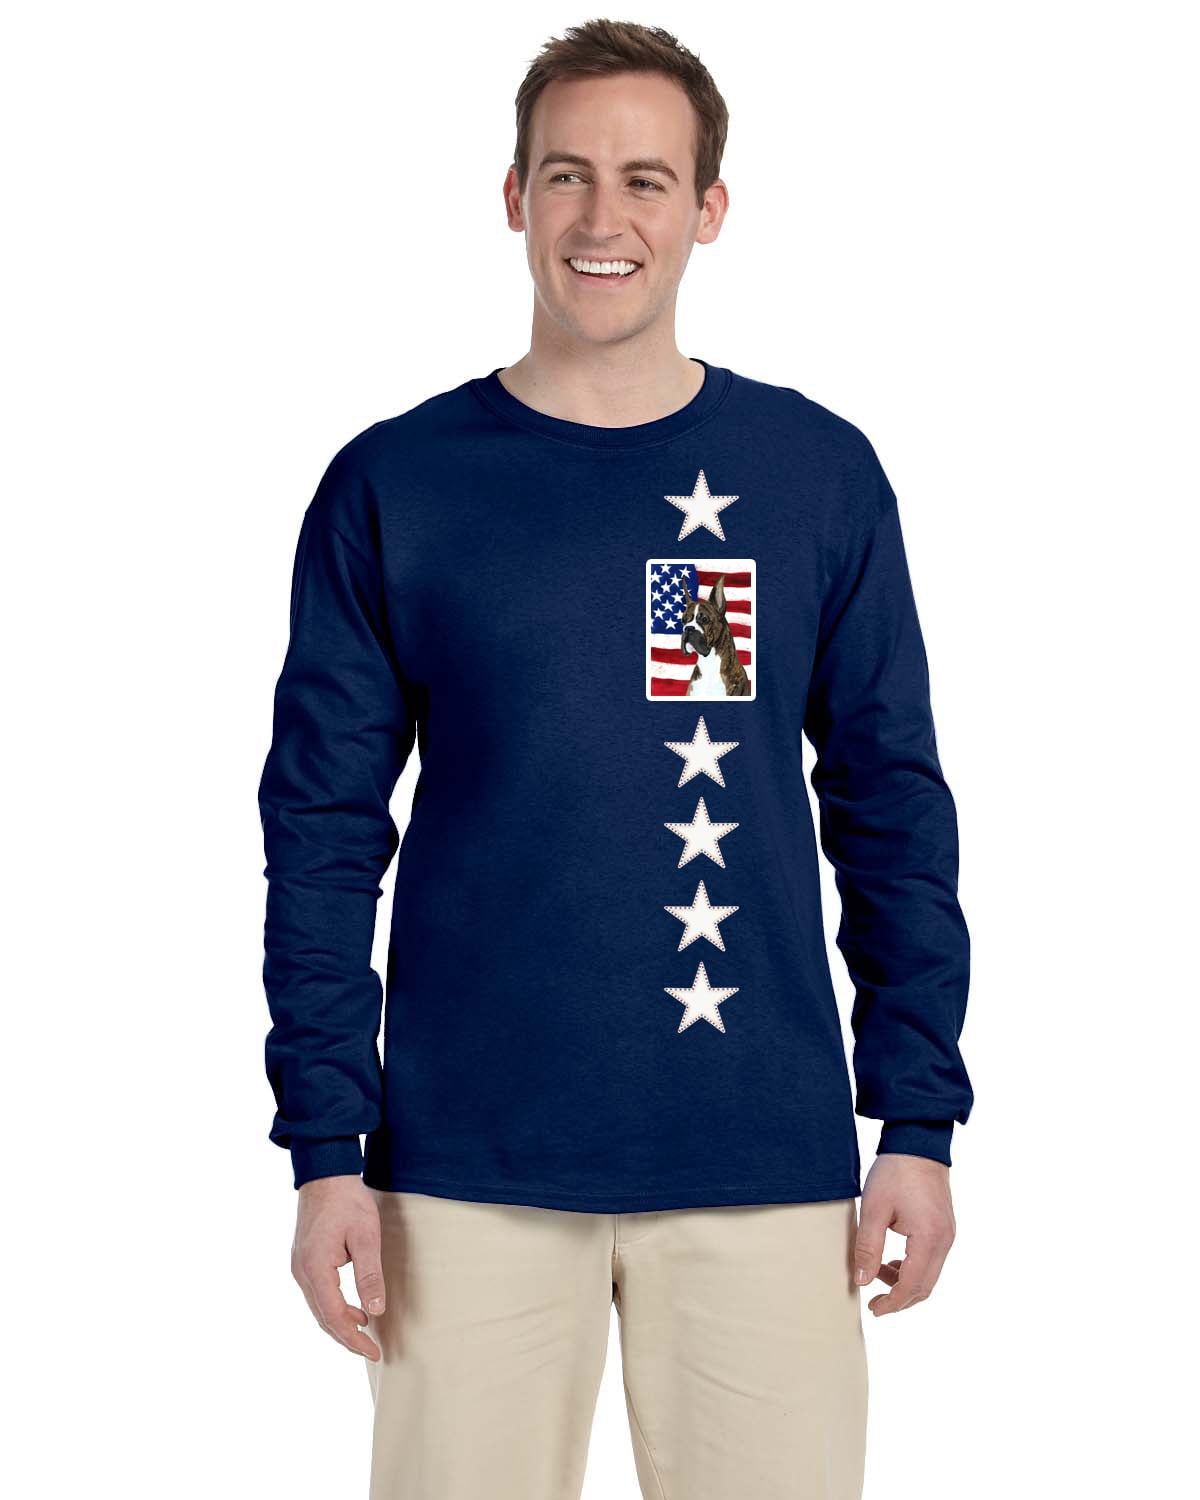 Multicolor L Carolines Treasures SS4035-LS-NAVY-L USA American Flag with Boxer Long Sleeve Blue Unisex Tshirt Adult Large 